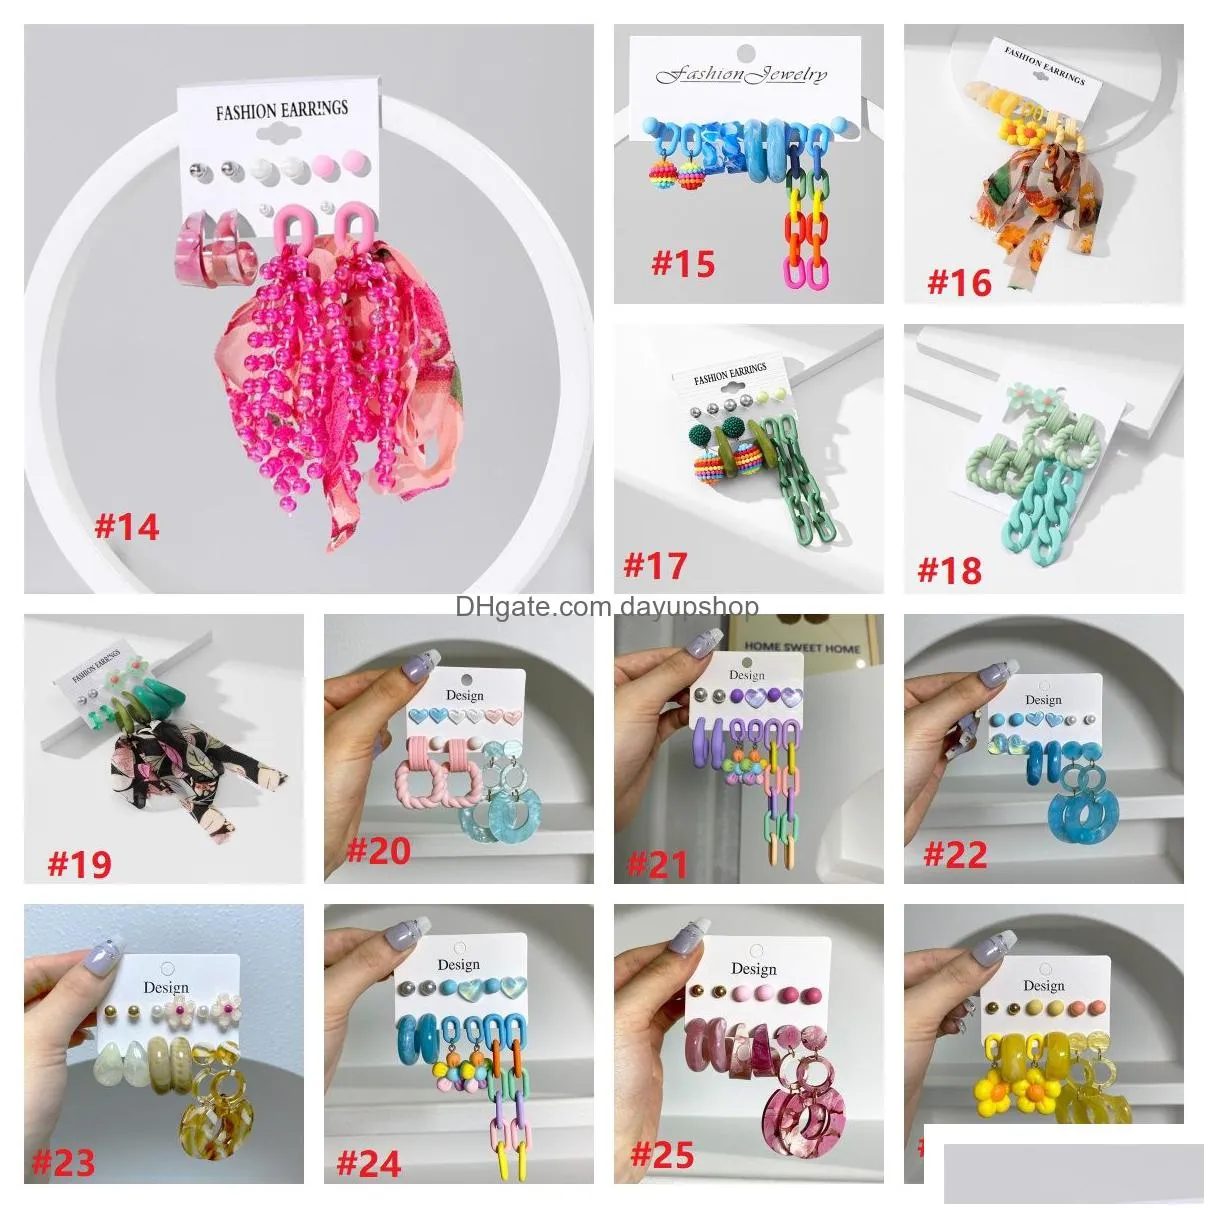 26 Styles Acrylic Earrings Set Fashion Exaggerated Show Face Thin Earring Drop Delivery Dhhig